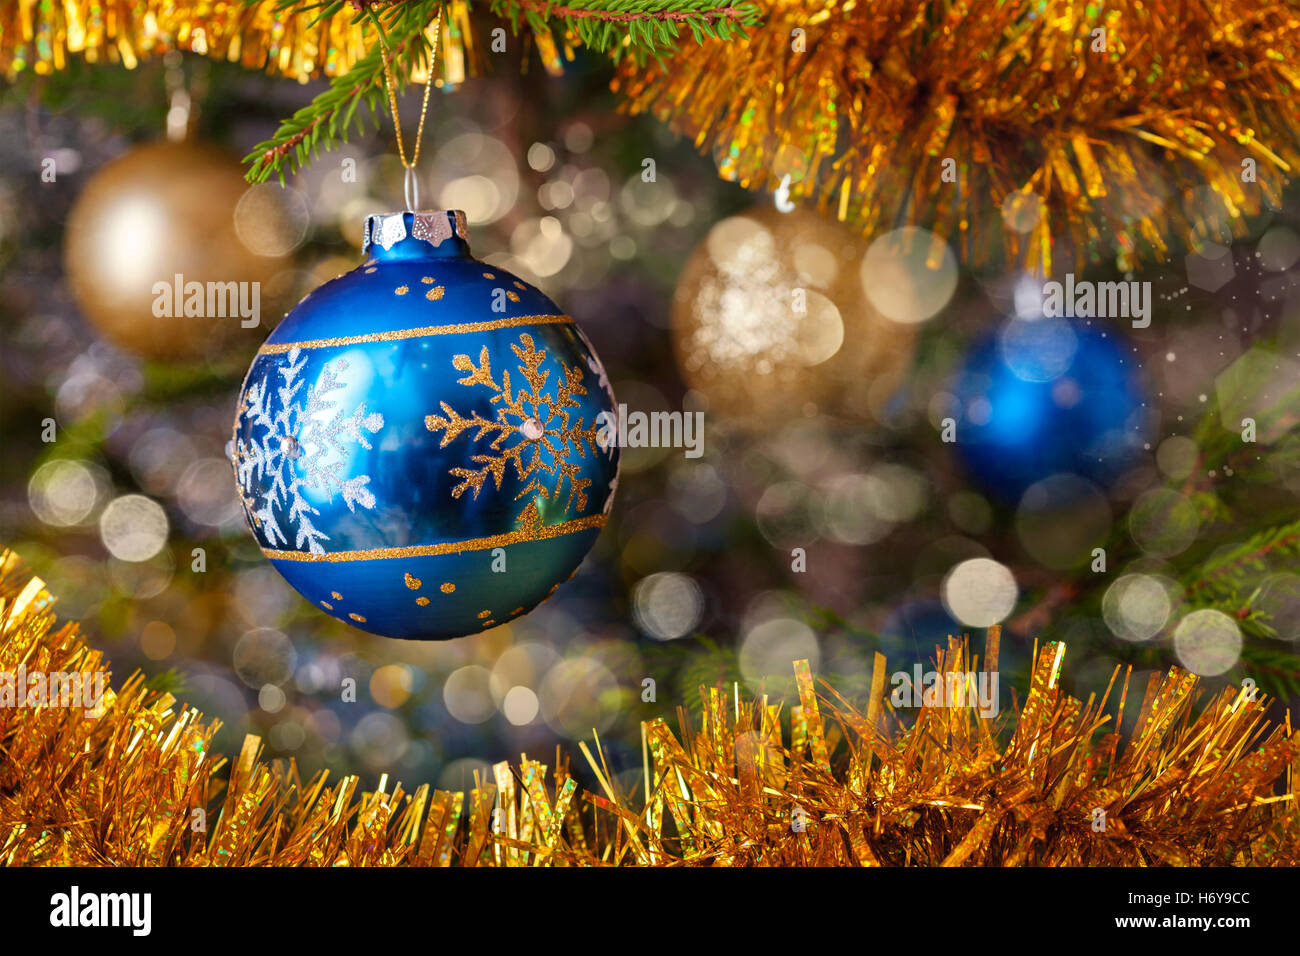 Decoration bauble on decorated Christmas tree Stock Photo